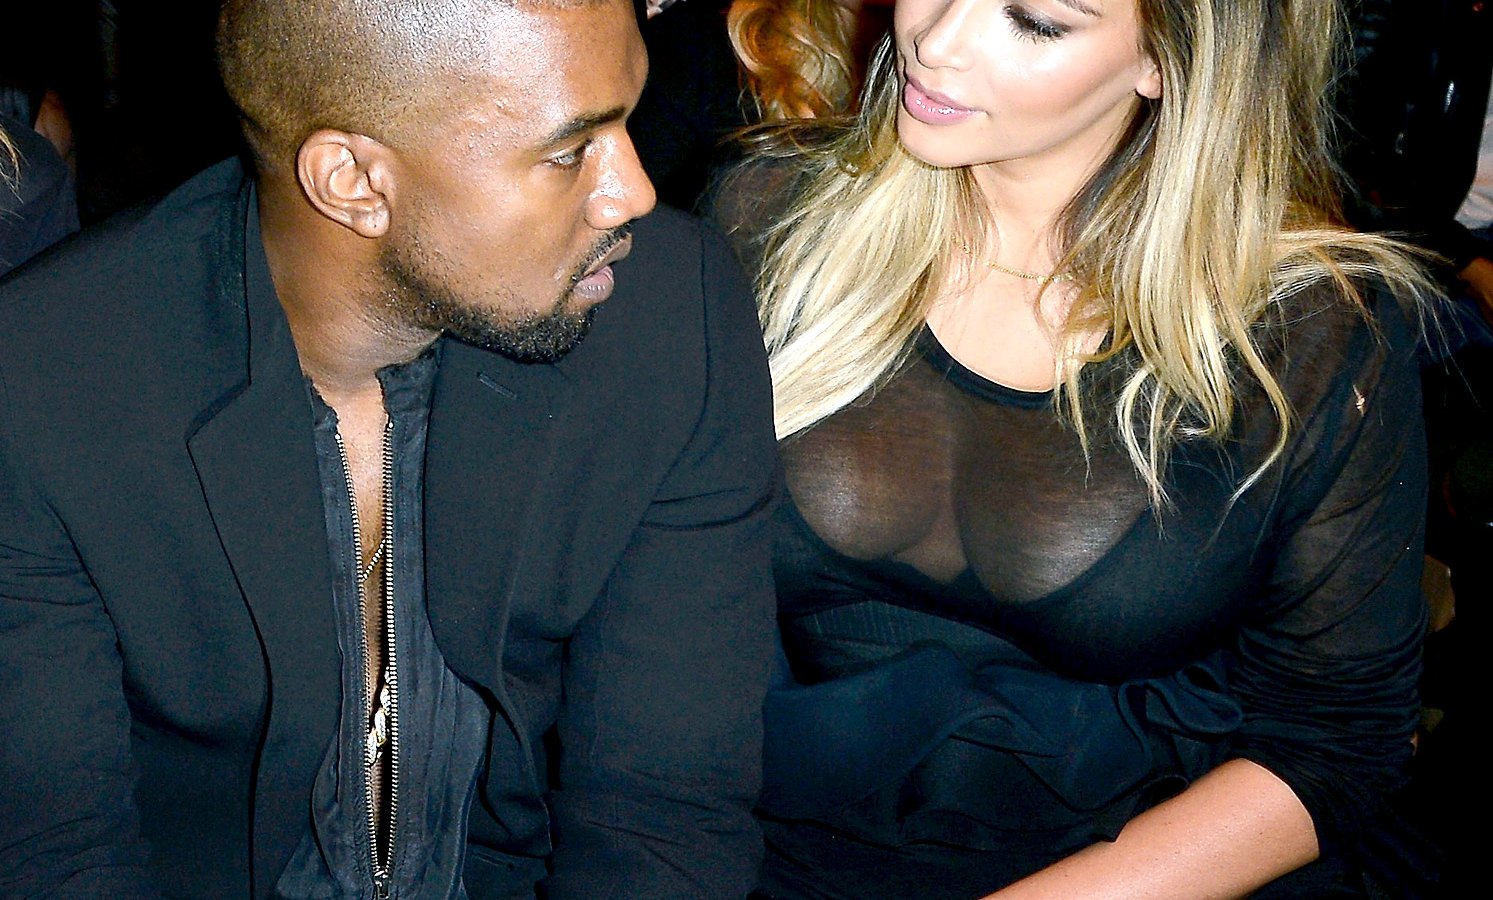 Kim Kardashian and Kanye West attend on Sept. 29, 2013 in Paris